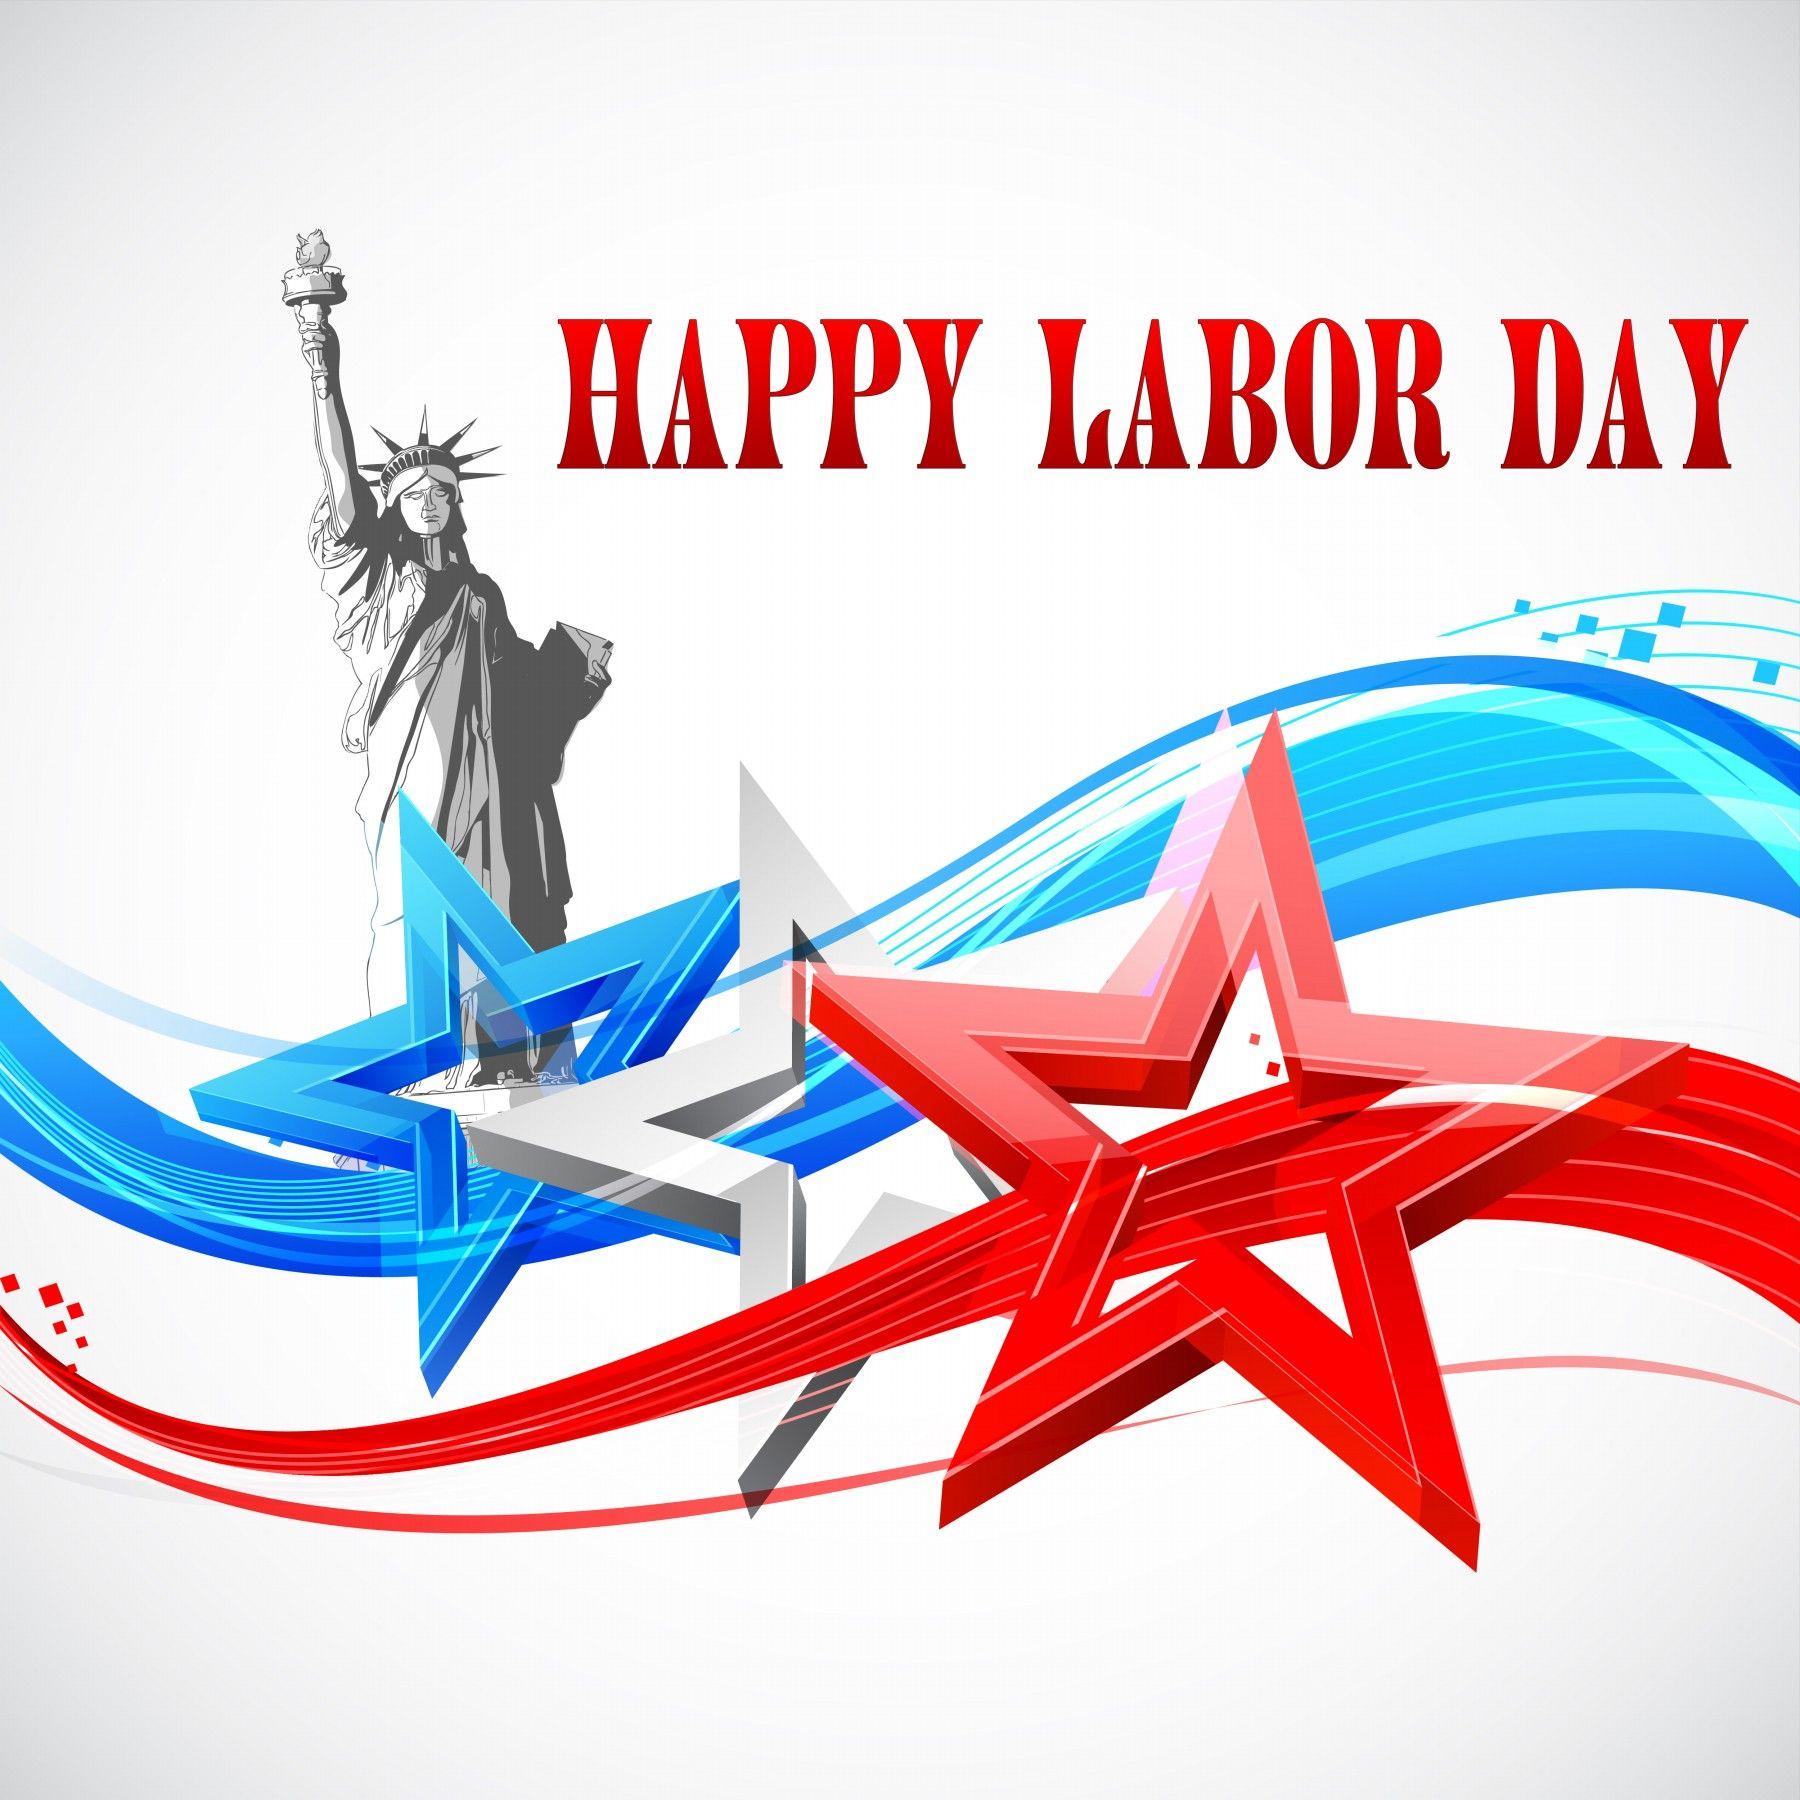 Happy Labor Day Wallpaper 52 images